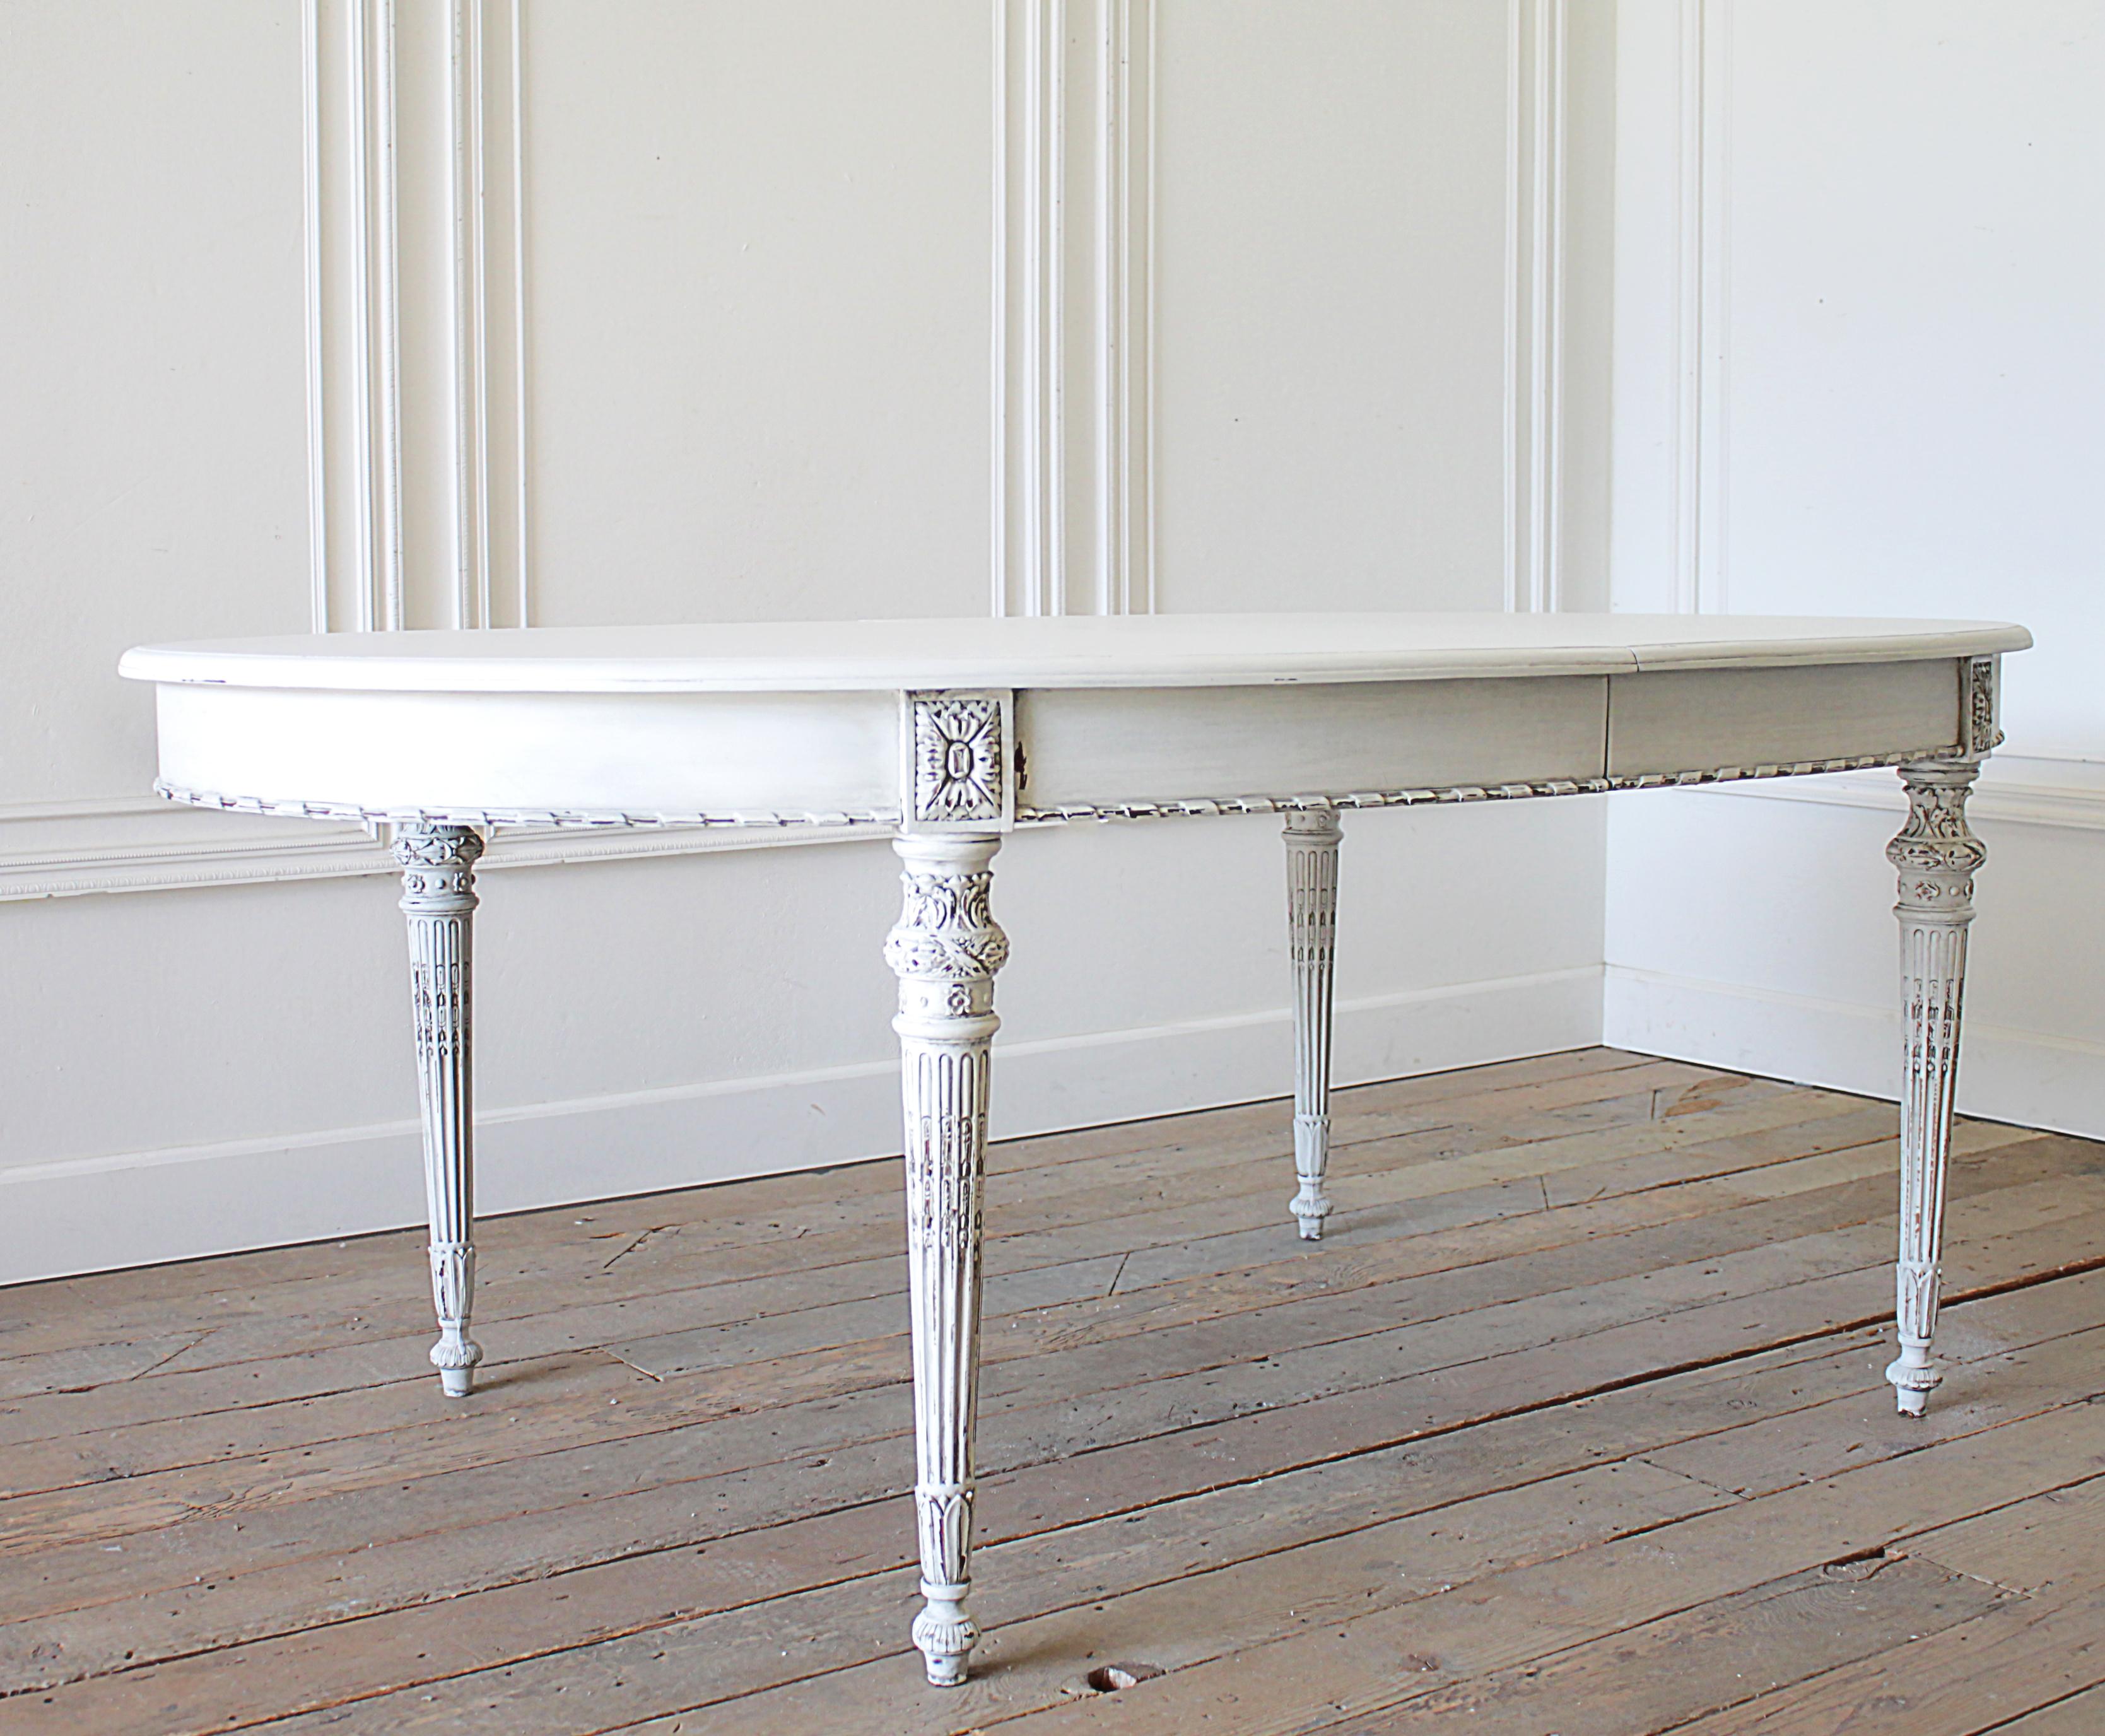 Antique painted Louis XVI style dining table with leaves
Painted in our oyster white finish, with subtle distressed edges, and soft antique glazed patina. Color is white, with a light grayish hue from the glaze, overall table is white. The table